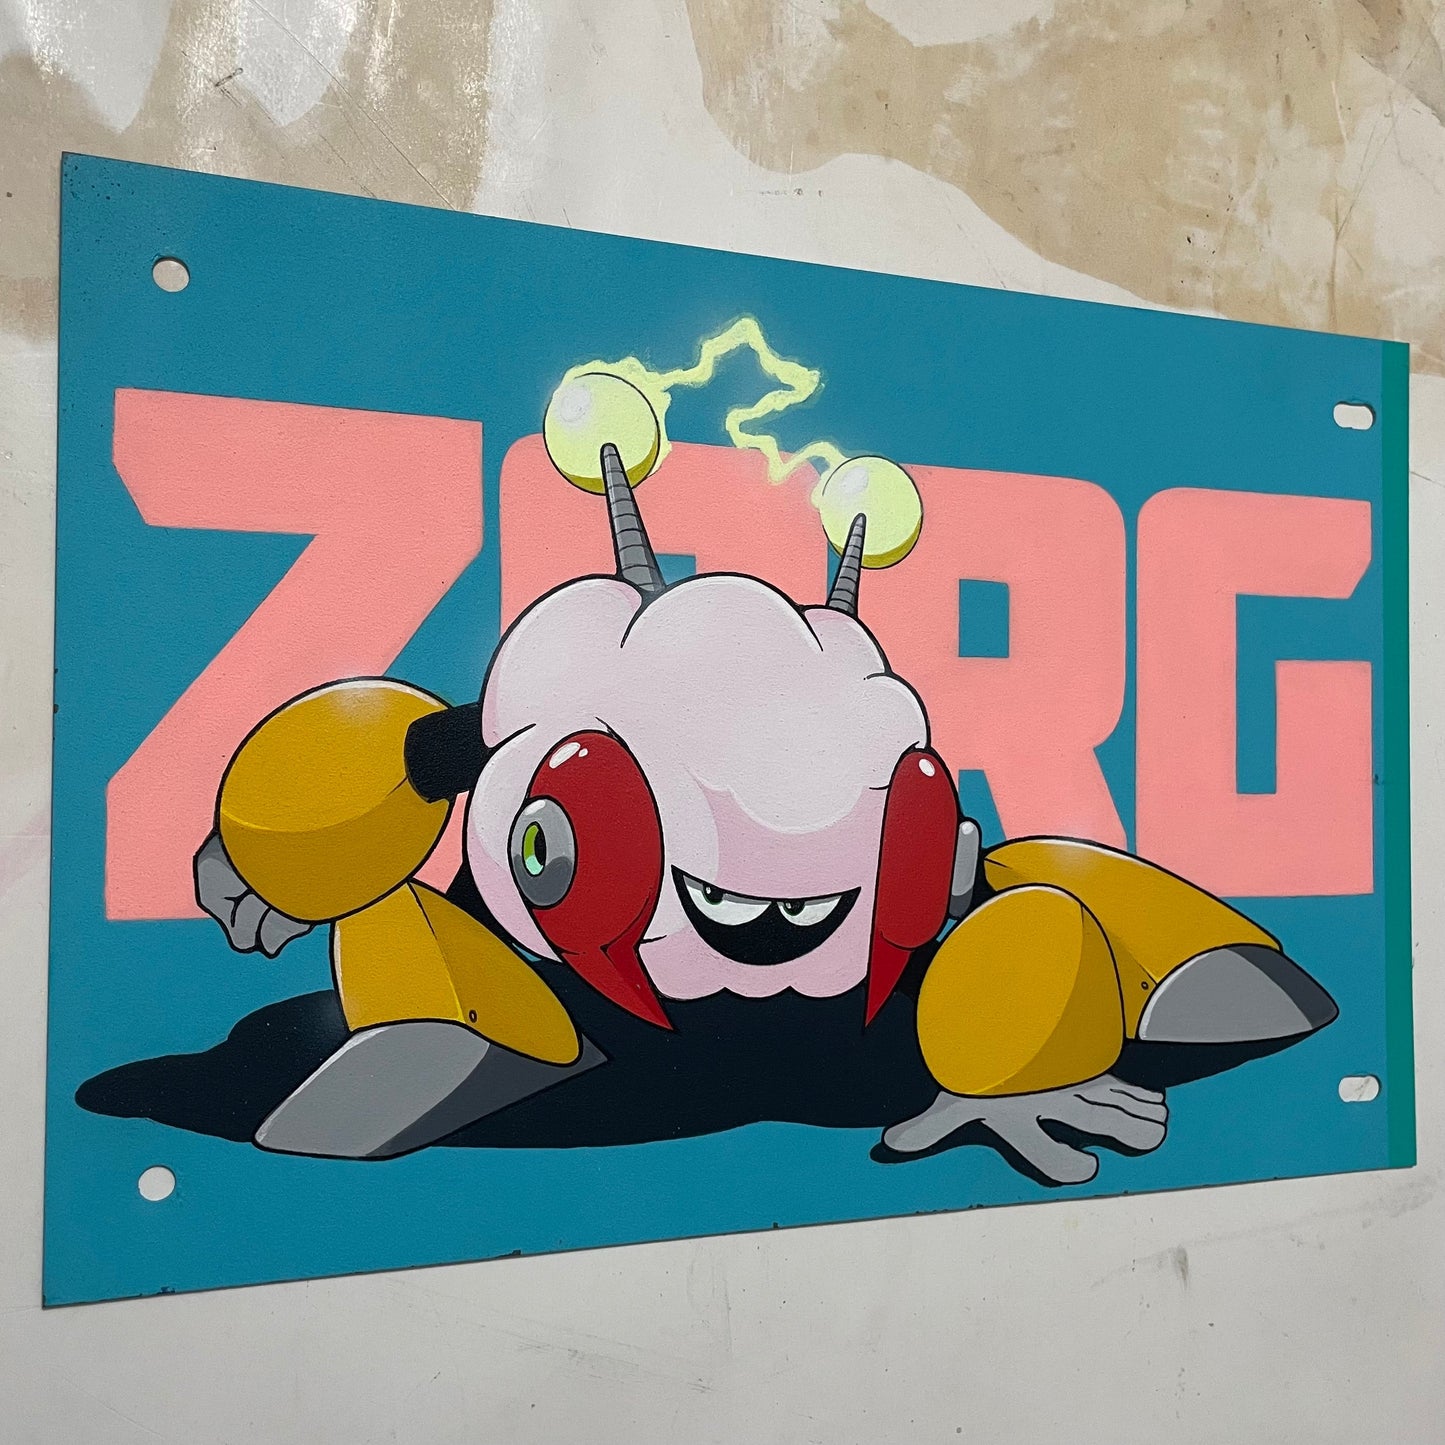 "ZORG" GEAR AOS 12" by 8" Metal Sign